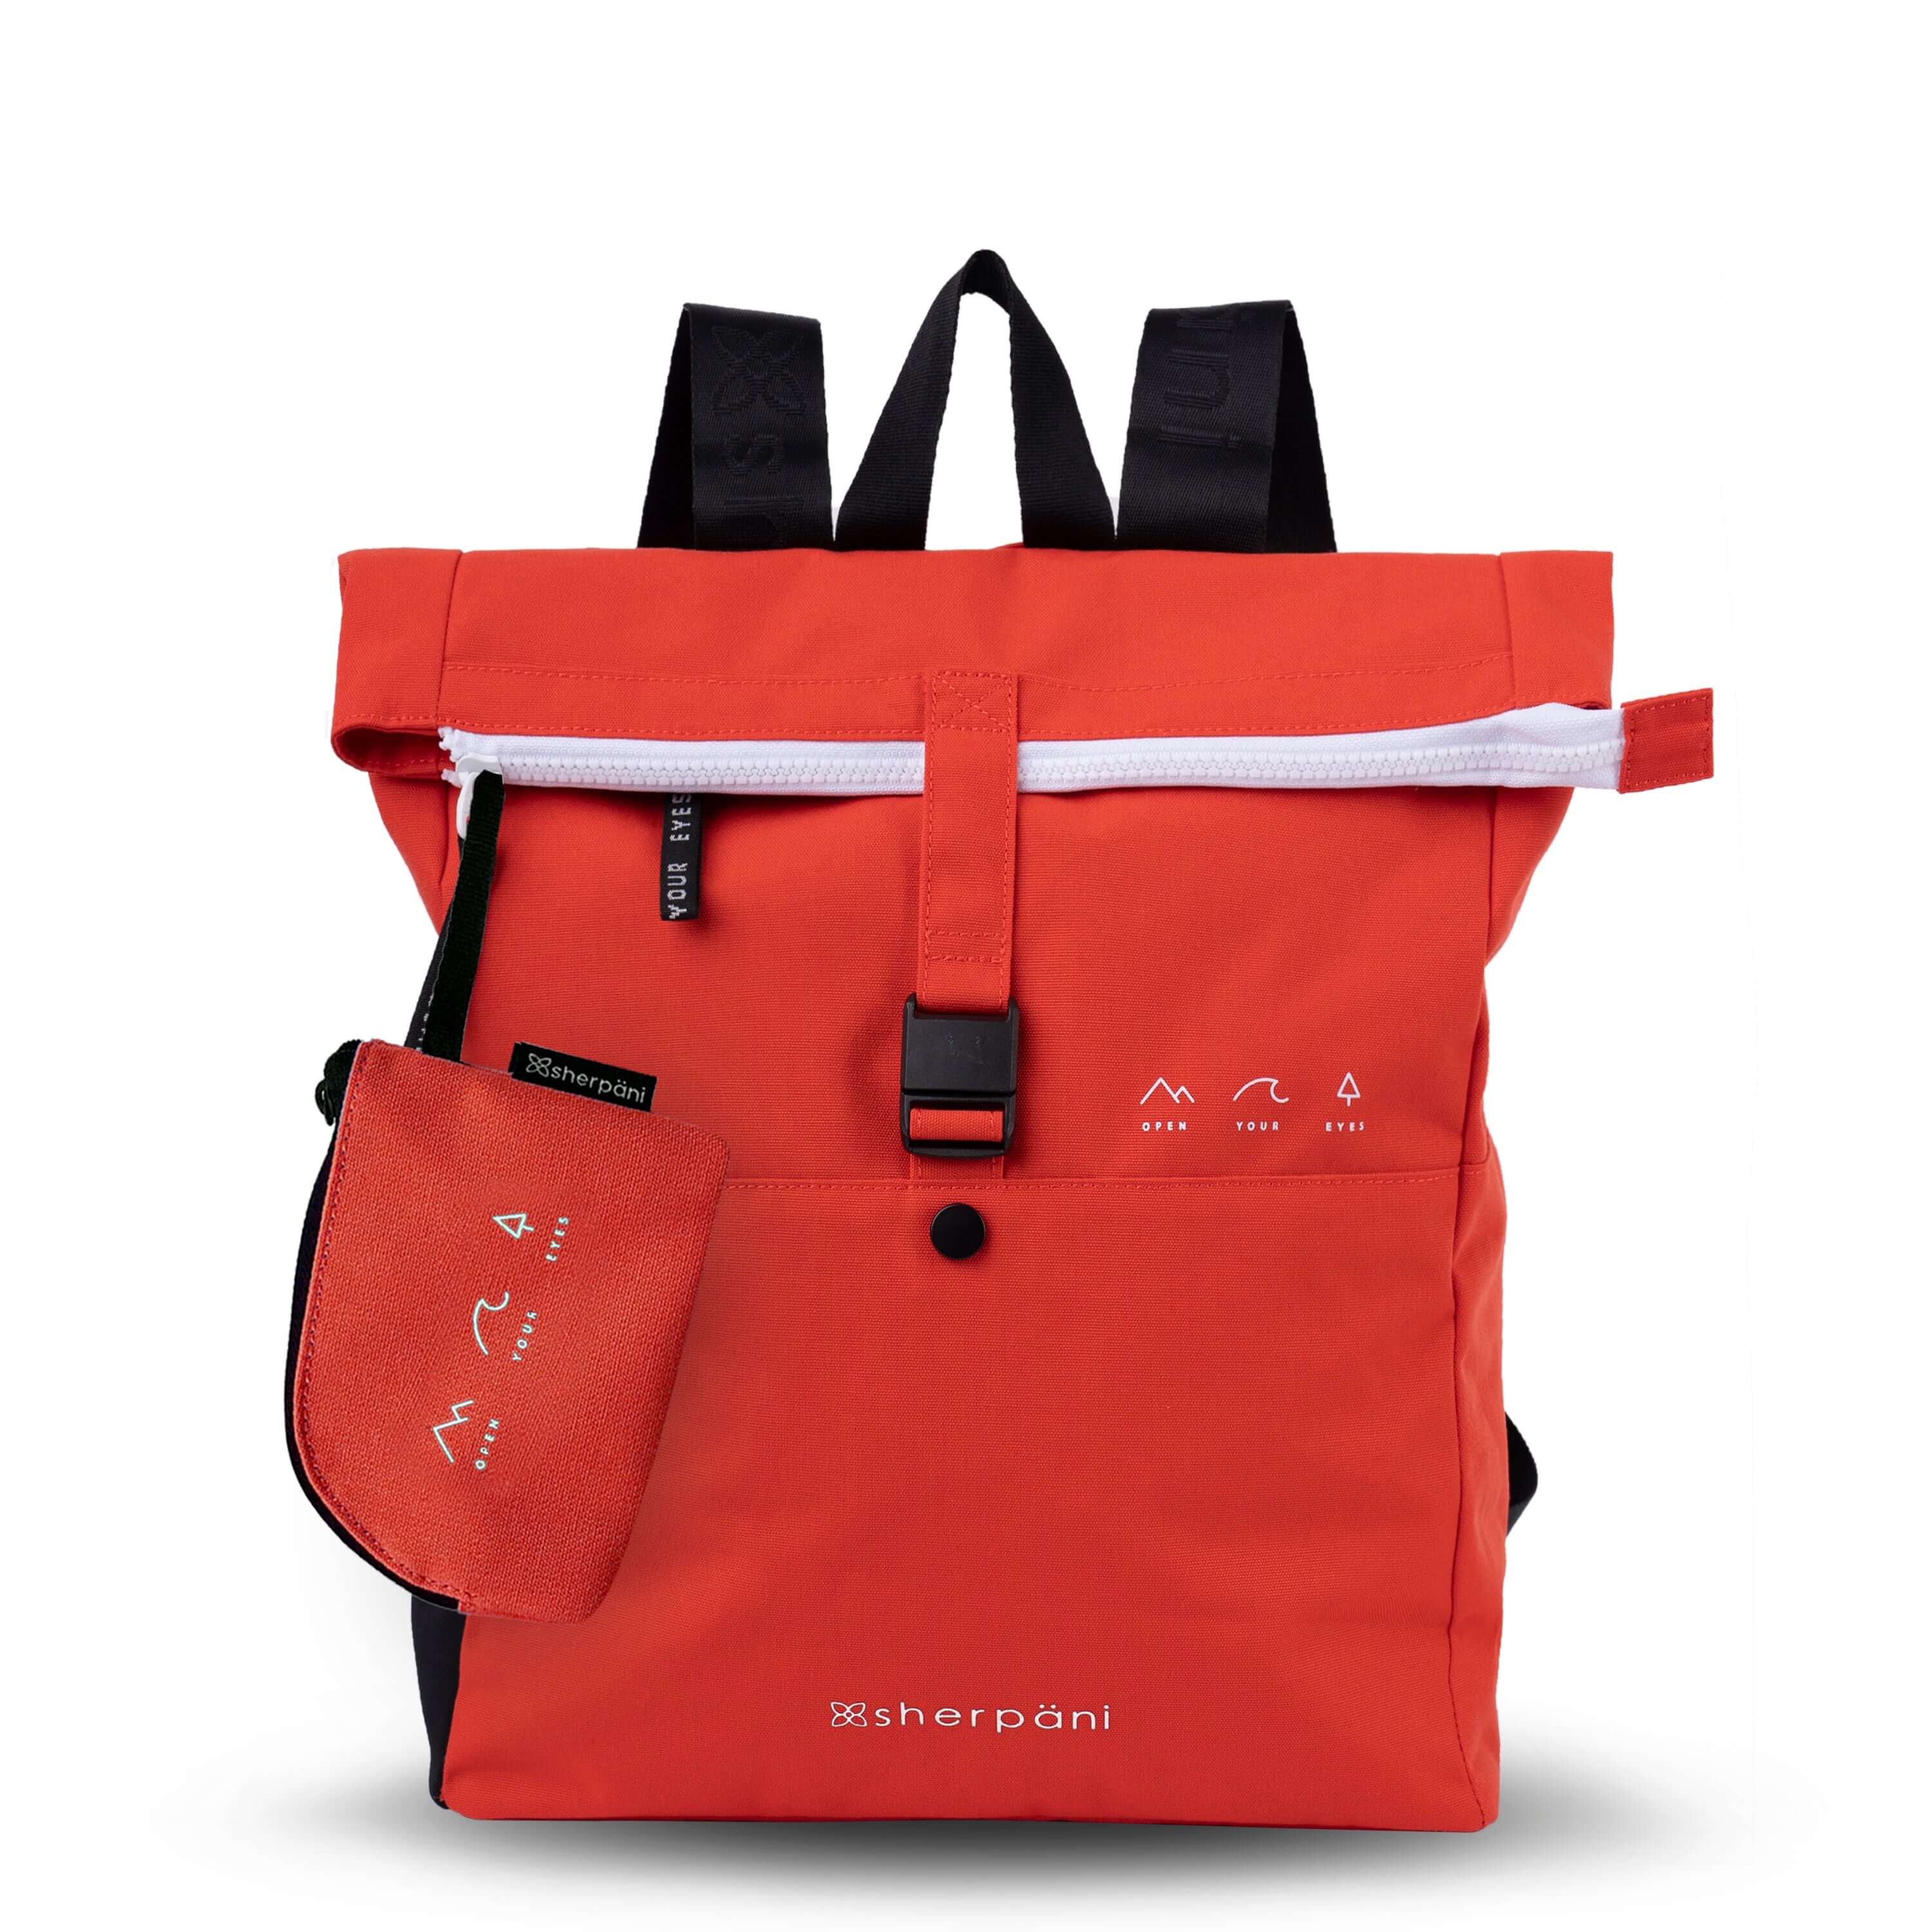 Flat front view of Sherpani backpack, the Miyako in Poppy. The bag is red in color with black accents. It features a magnetic buckle closure, adjustable backpack straps and an external water bottle holder. On the right side are small white graphics that depict mountains, a wave and a pine tree above white text that reads &quot;Open Your Eyes.&quot; The bag includes a matching and detachable coin purse.